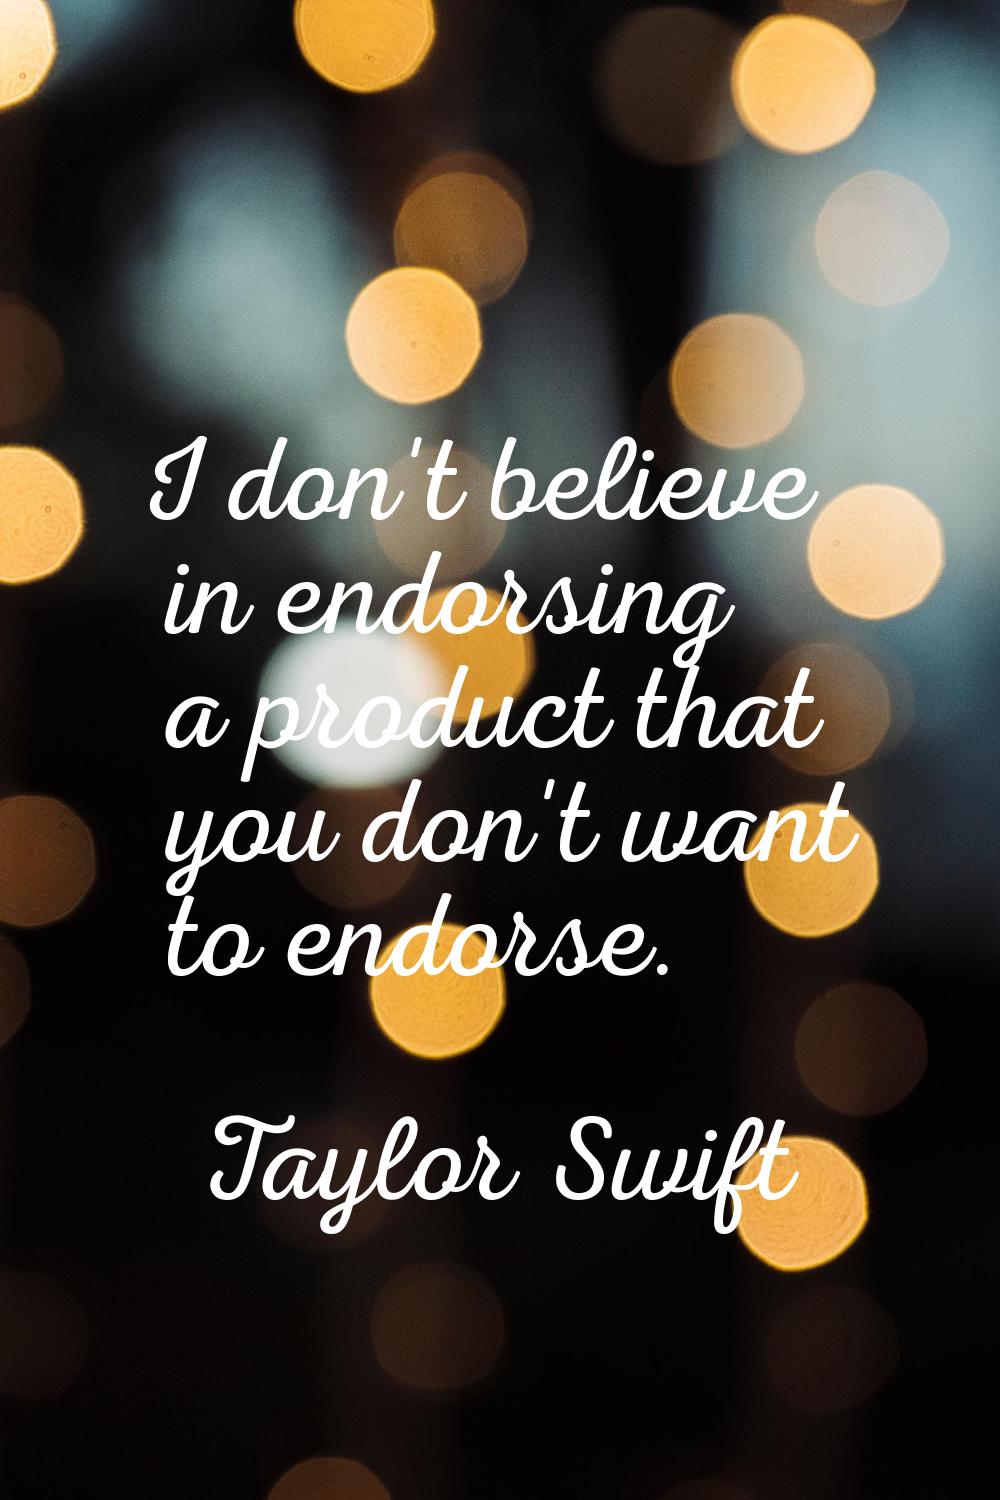 I don't believe in endorsing a product that you don't want to endorse.